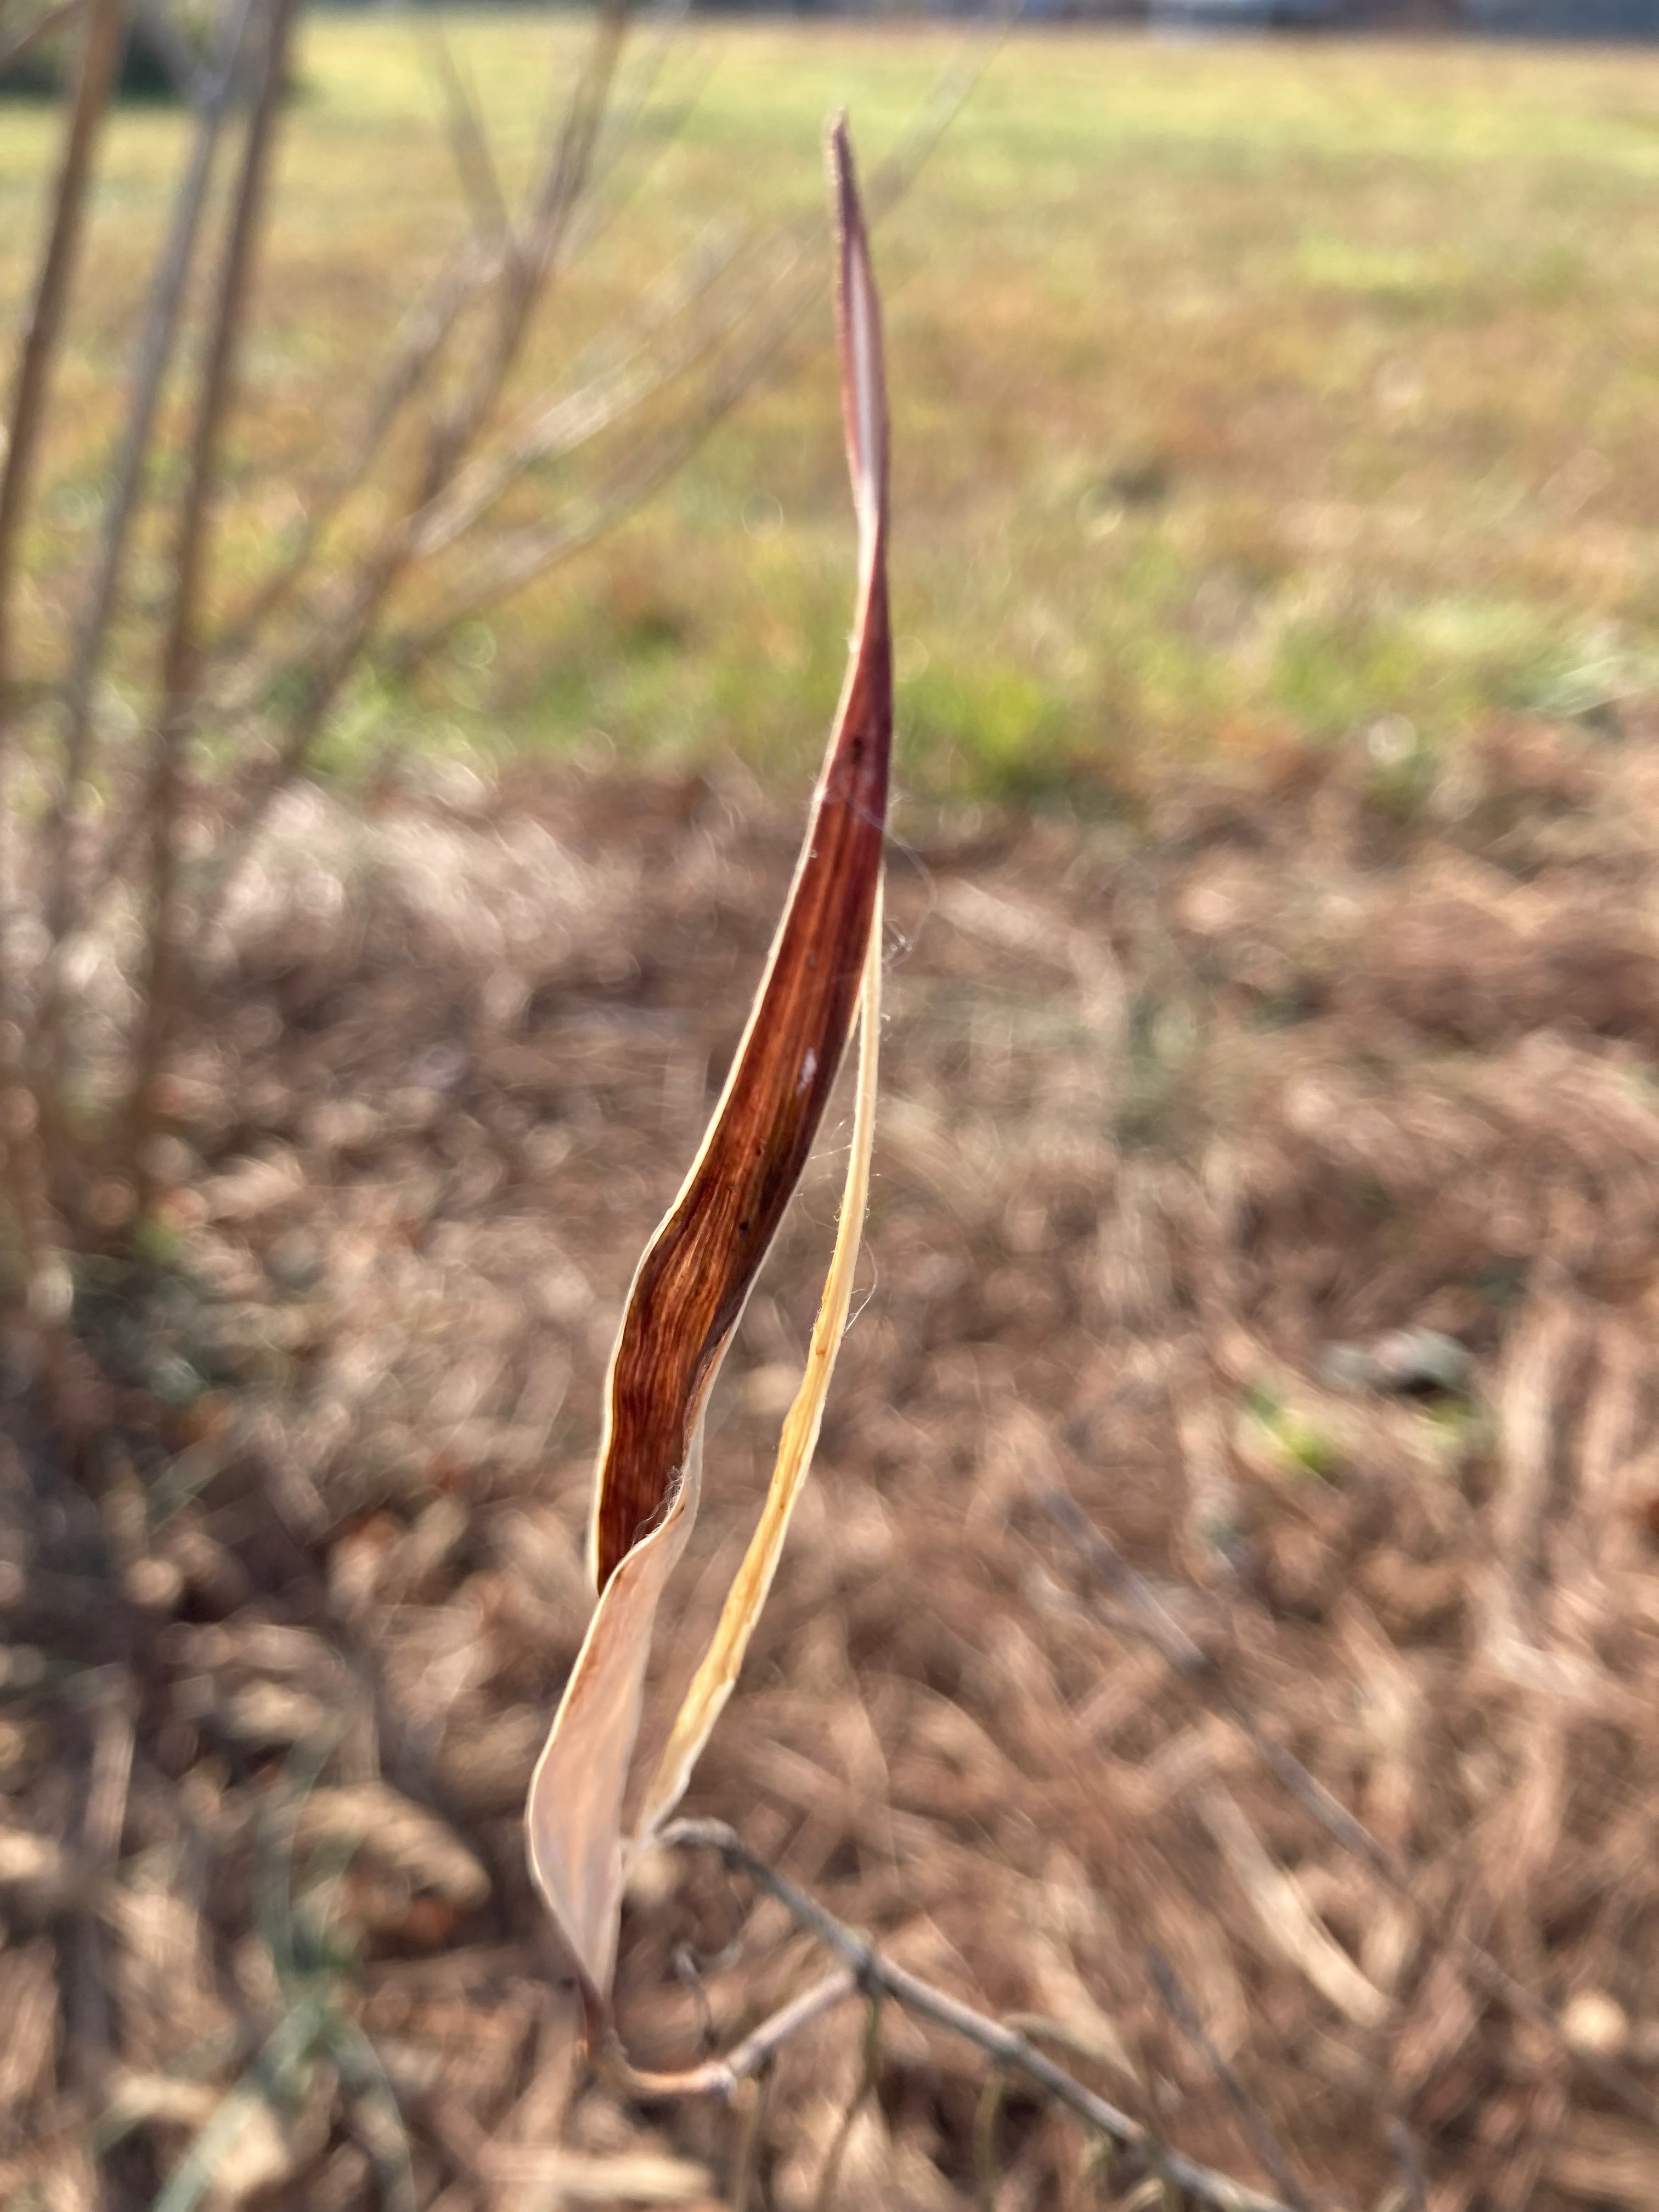 The Scientific Name is Asclepias verticillata. You will likely hear them called Whorled Milkweed. This picture shows the Empty follicle having already dispersed its seeds to the winds. of Asclepias verticillata